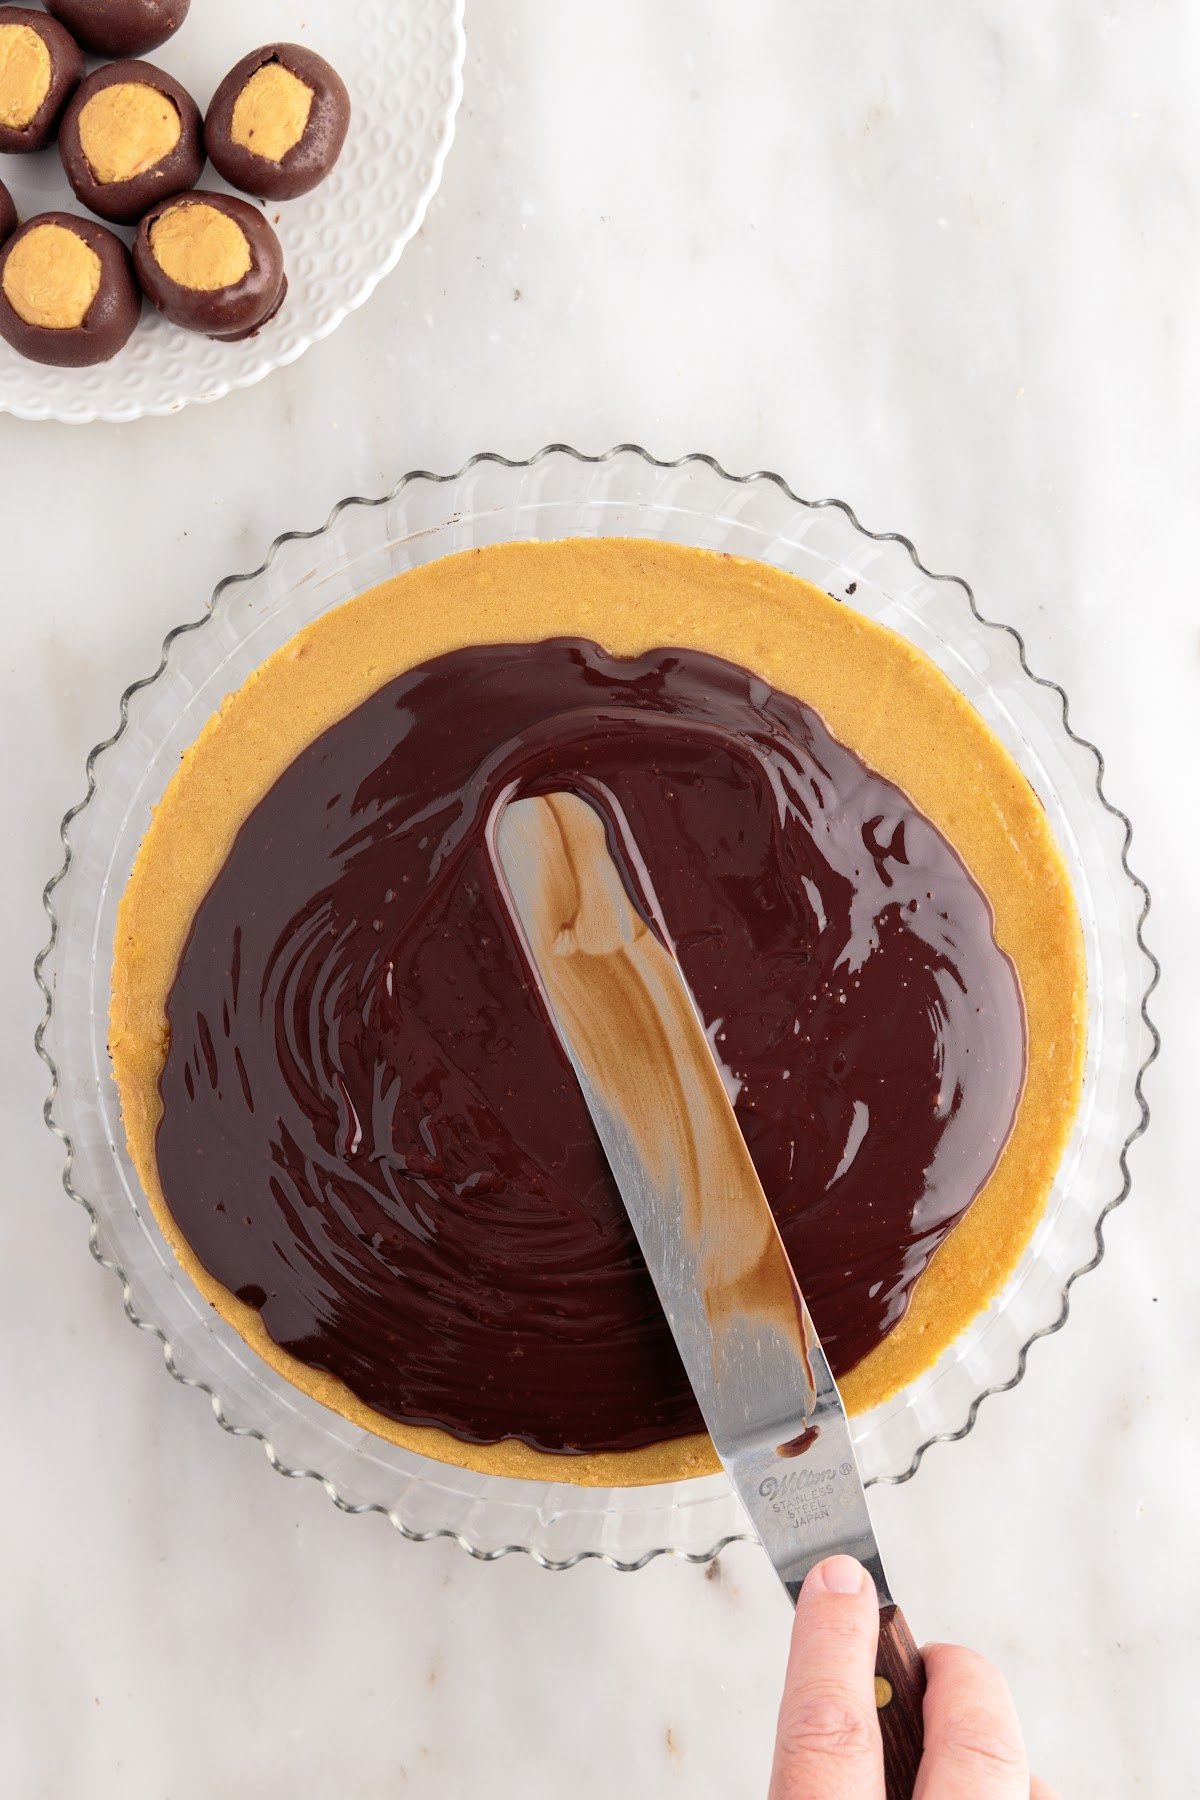 Ganache smoothed over the top of the Chocolate Peanut Butter Cheesecake.